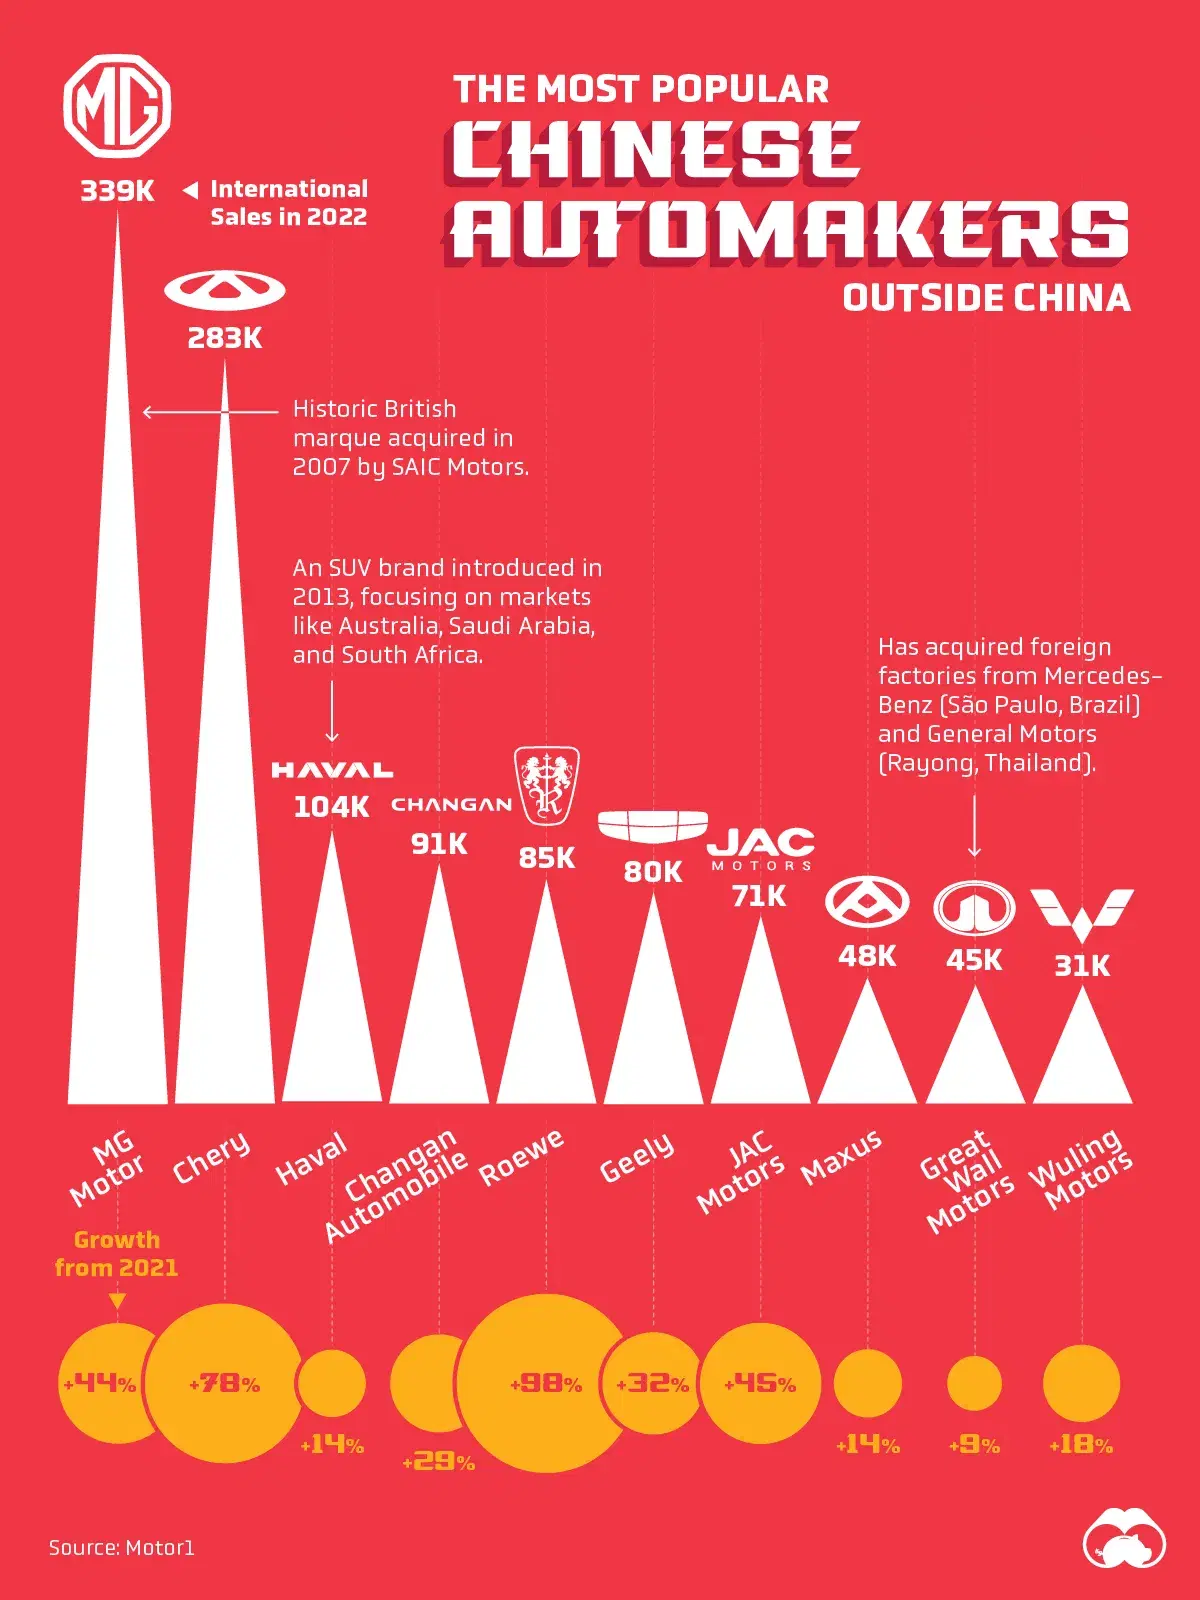 Ranked: Top Chinese Automakers Outside of China 